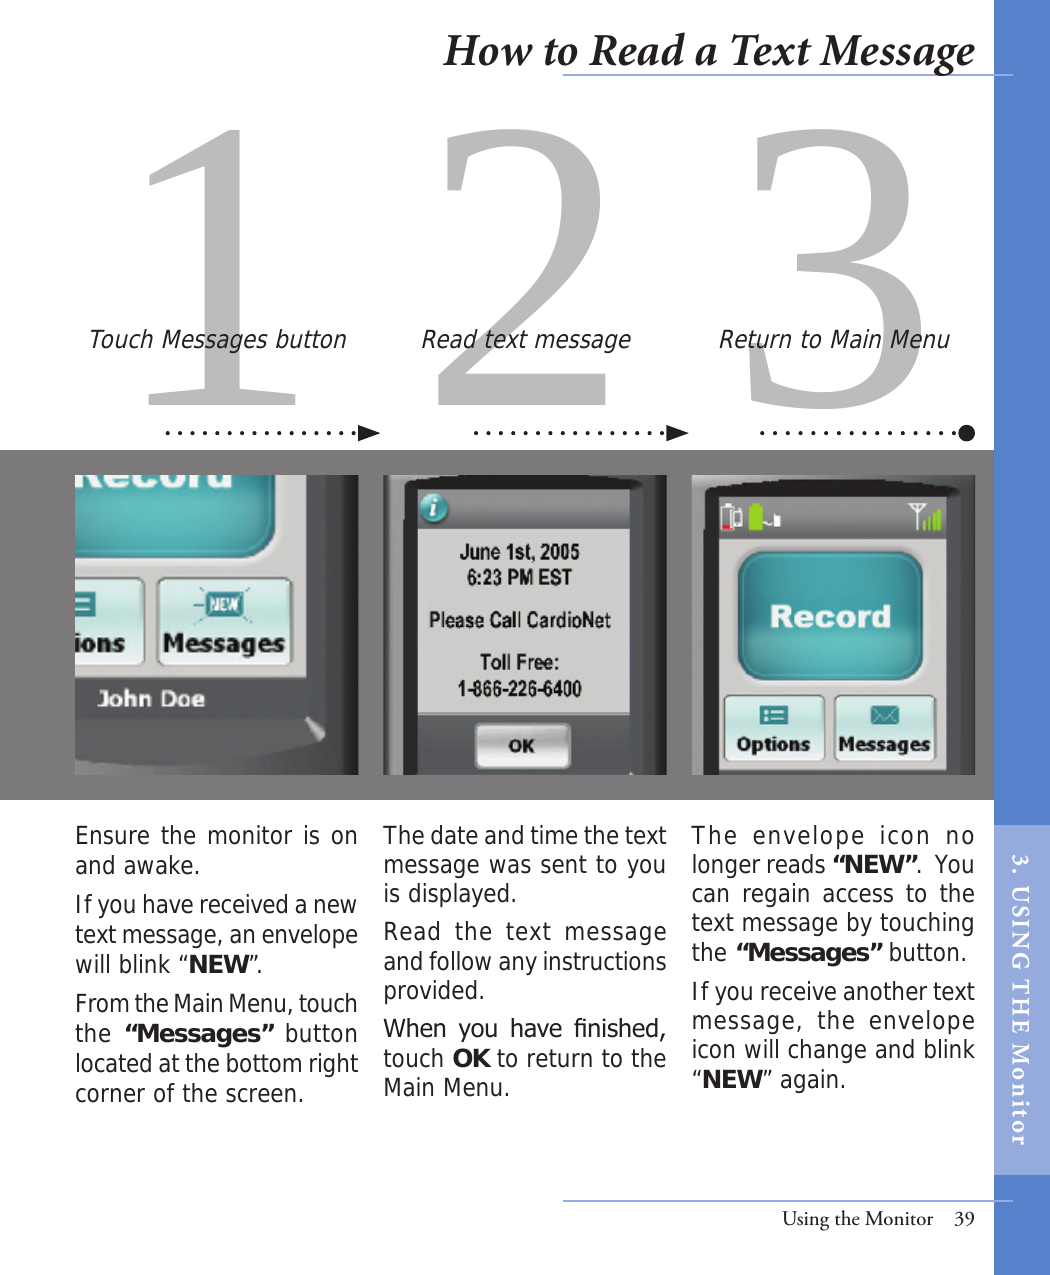 31 2Ensure the monitor is on and awake.  If you have received a new text message, an envelope will blink “NEW”. From the Main Menu, touch the “Messages” button located at the bottom right corner of the screen.The envelope icon no longer reads “NEW”.  You can regain access to the text message by touching the “Messages” button. If you receive another text message, the  envelope icon will change and blink “NEW” again.  The date and time the text message was sent to you is displayed. Read the text  message and follow any instructions provided.When  you  have  nished, touch OK to return to the Main Menu. Touch Messages button Read text message Return to Main MenuUsing the Monitor  39How to Read a Text Message3.  USI NG  T H E   Mo n i tor